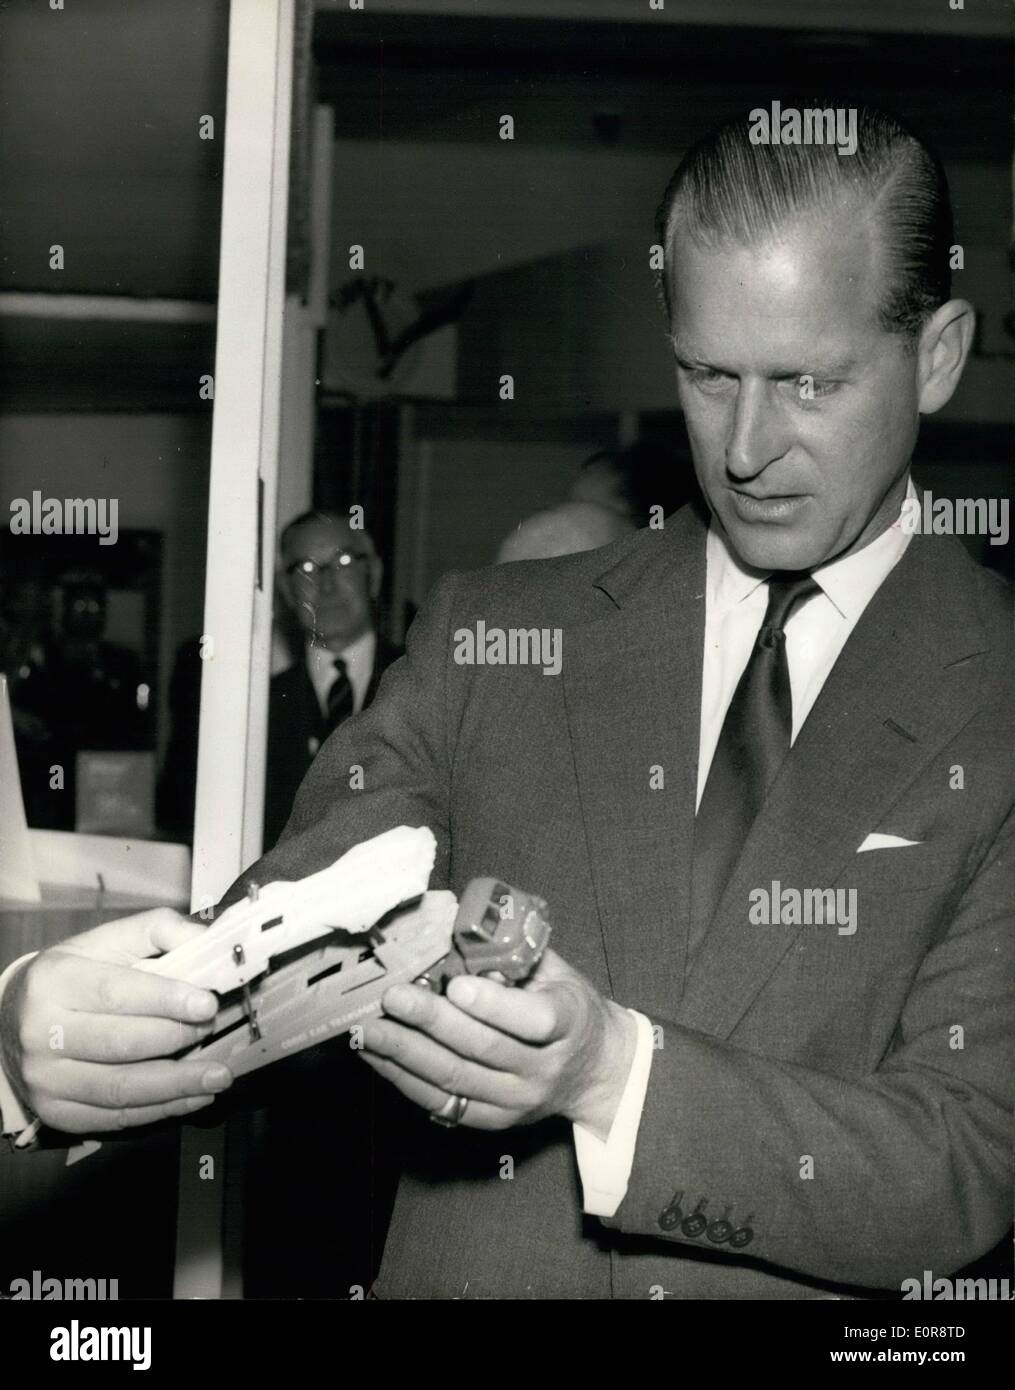 Jul. 07, 1958 - Duke of Edinburgh Opens Exhibition In Cardiff. Photo Shows:- The Duke of Edinburgh examines a toy car transporter during his visit to the James Howell Company Ltd, in Cardiff, Wales, to open an exhibition by the National Union of Manufacturers. Stock Photo